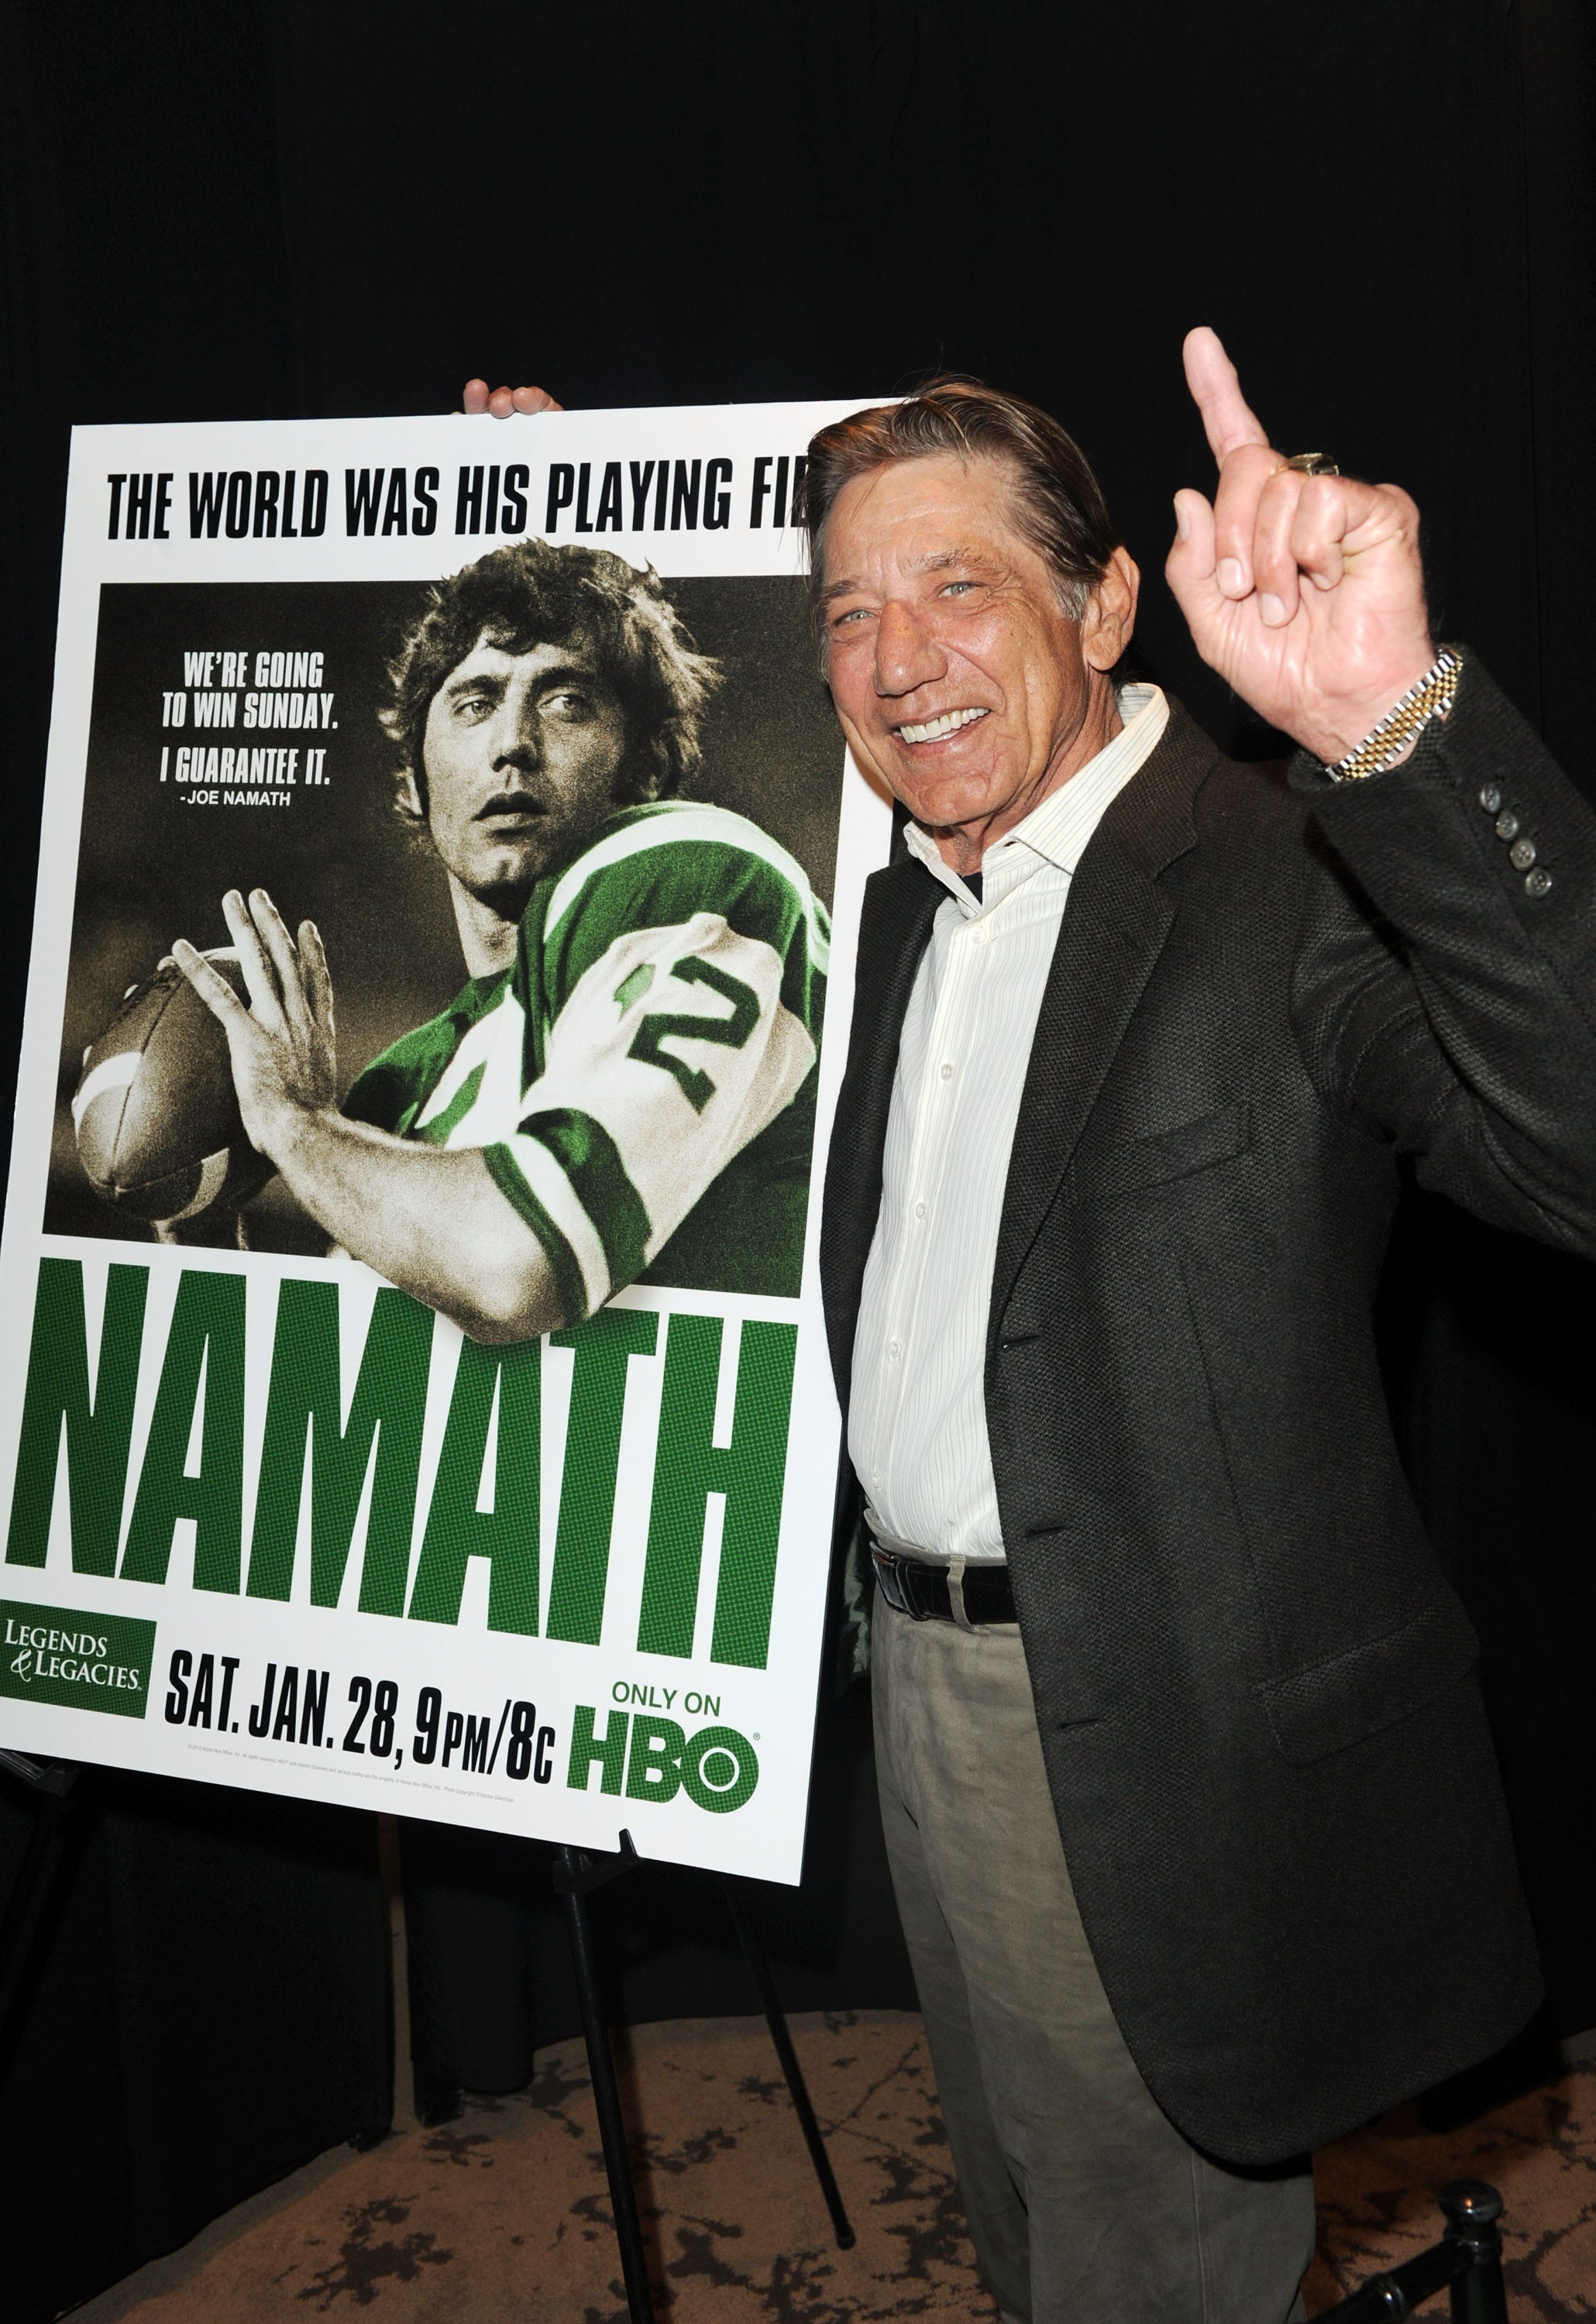 It's been 50 years since Joe Namath held that famous poolside chat with reporters ahead of the Super Bowl.